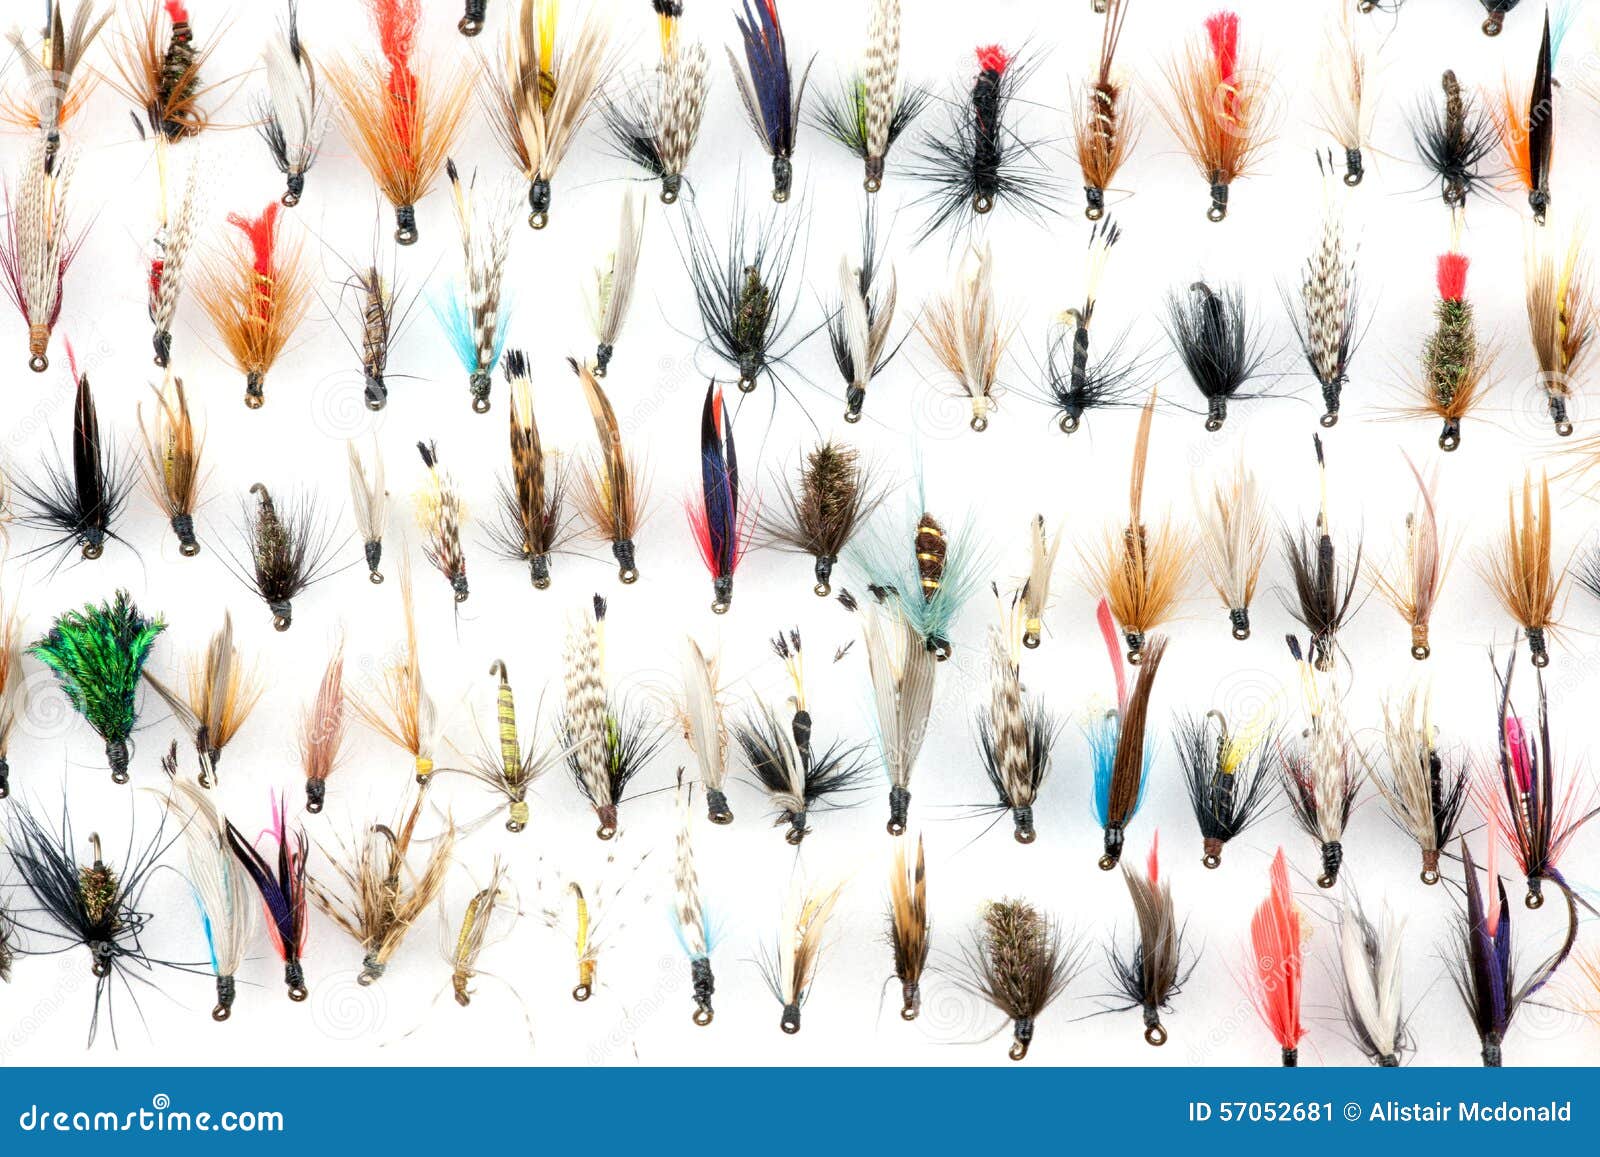 https://thumbs.dreamstime.com/z/trout-fishing-flies-selection-traditional-fly-box-57052681.jpg